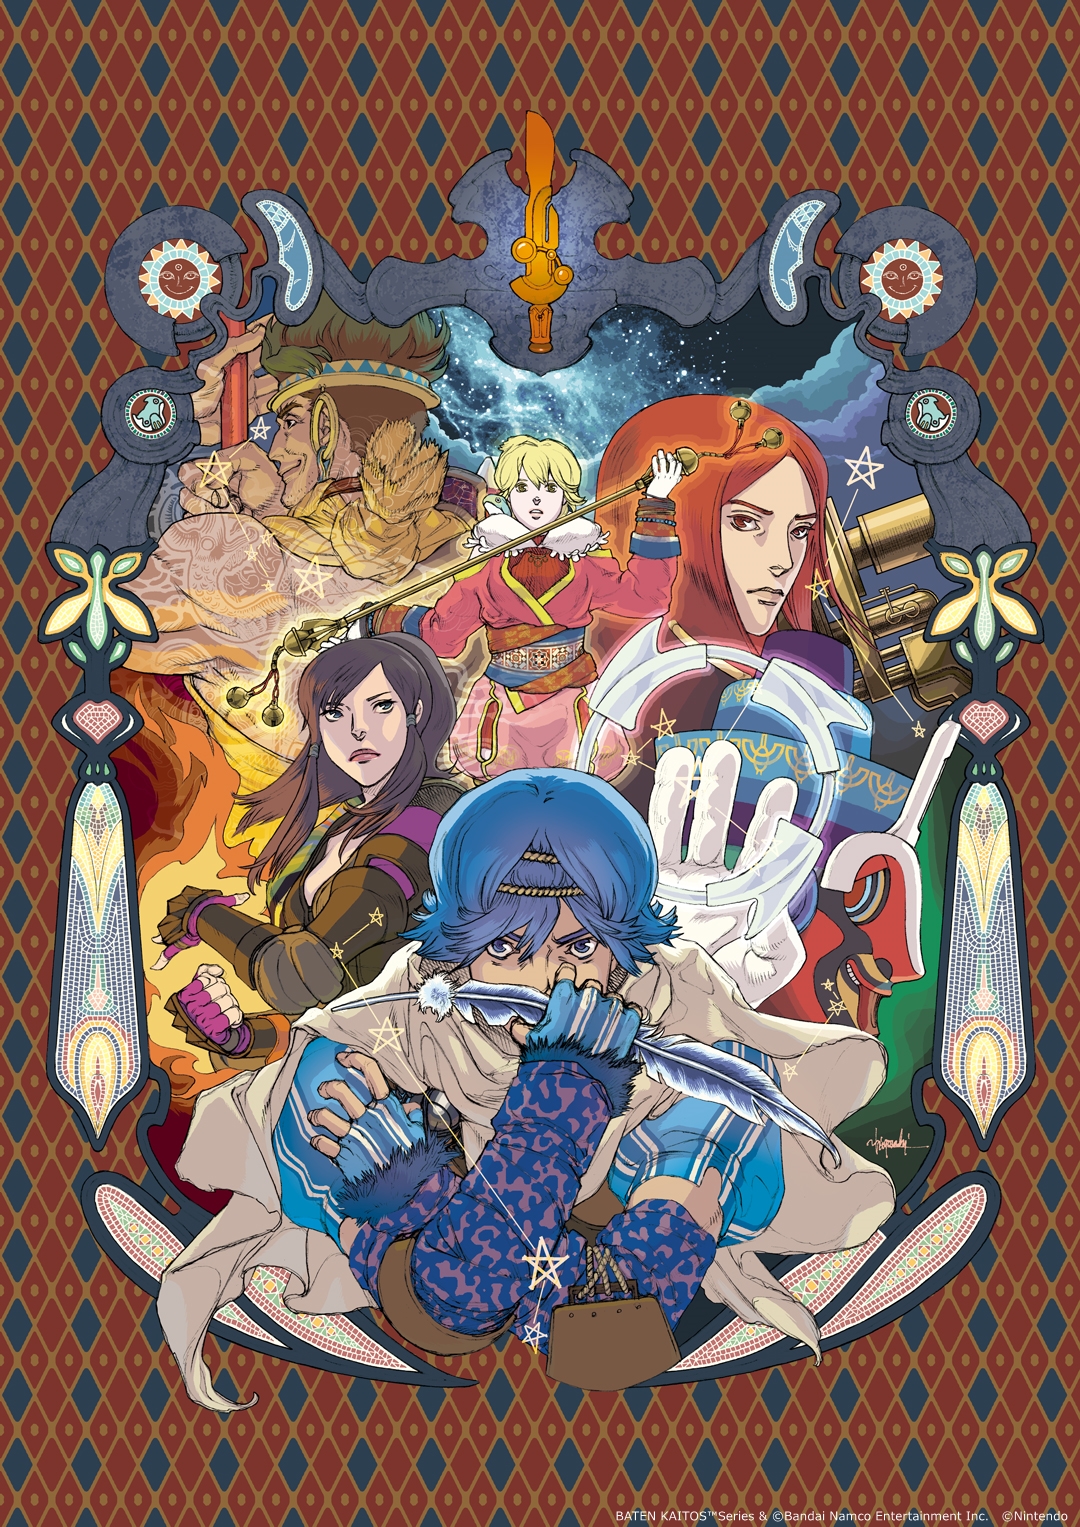 Baten Kaitos I & II HD Remaster coming physically on Nintendo Switch